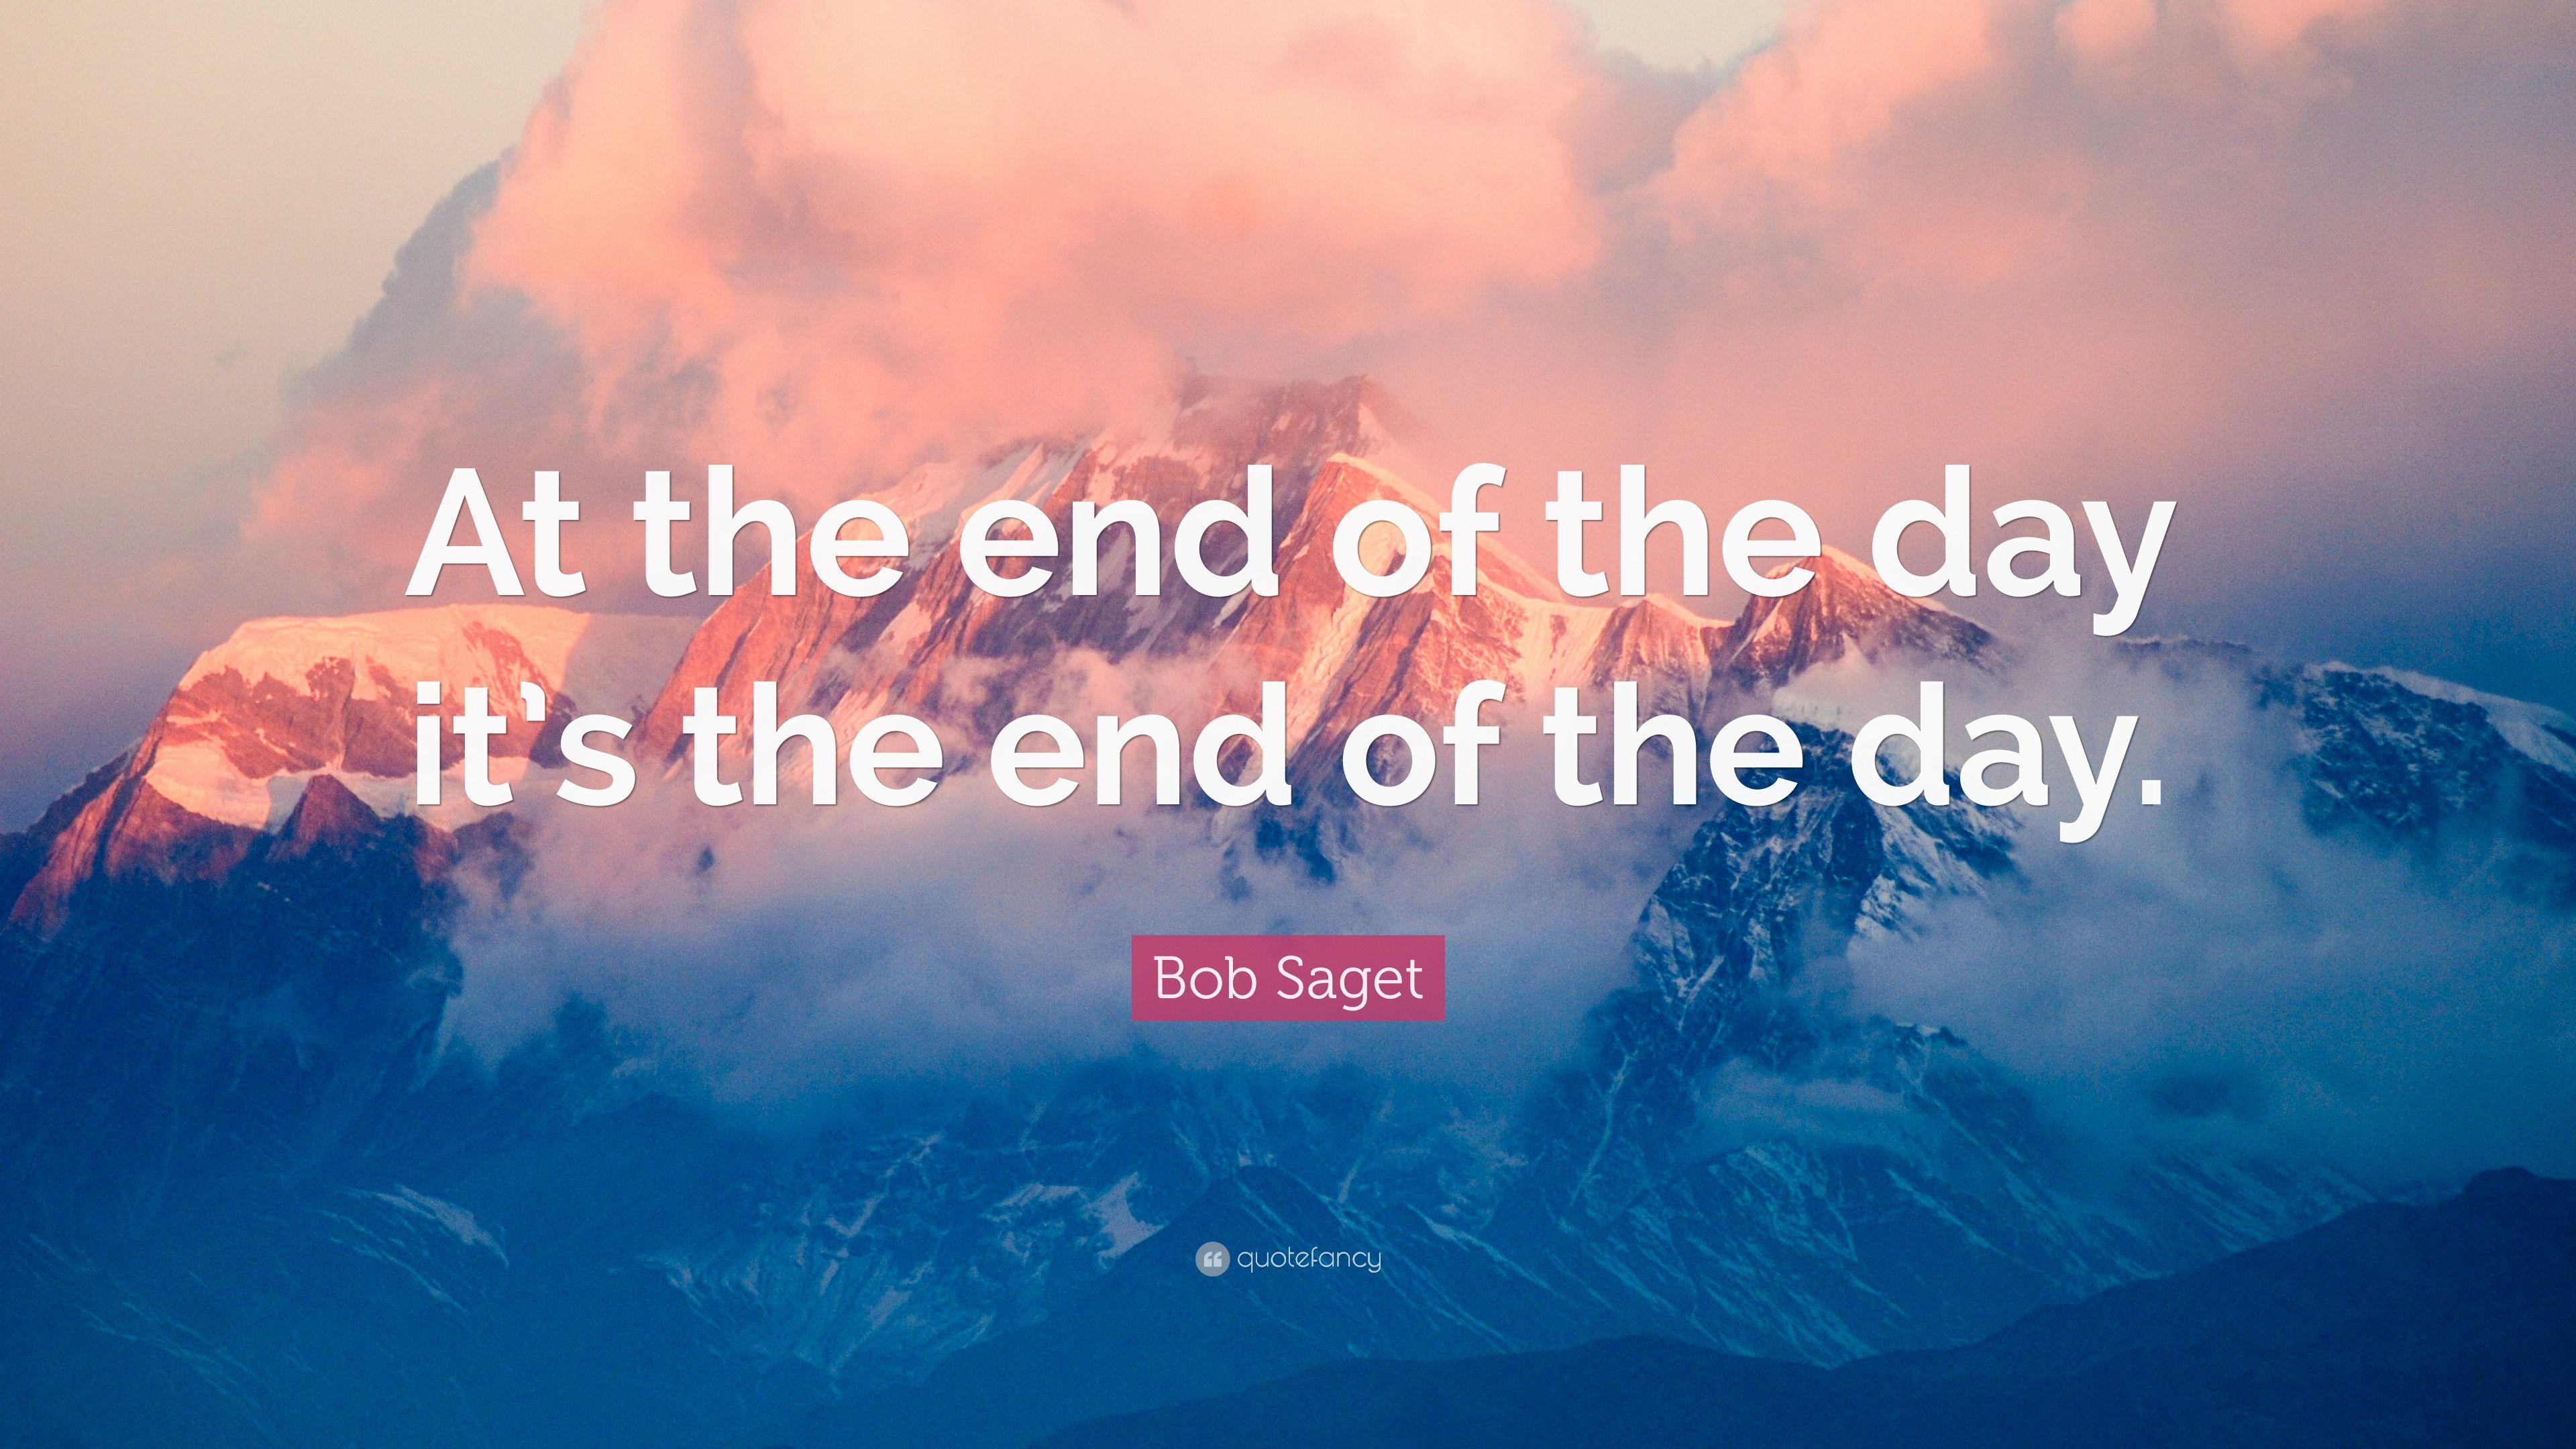 Bob Saget Quote: “At the end of the day it's the end of the day.” 7